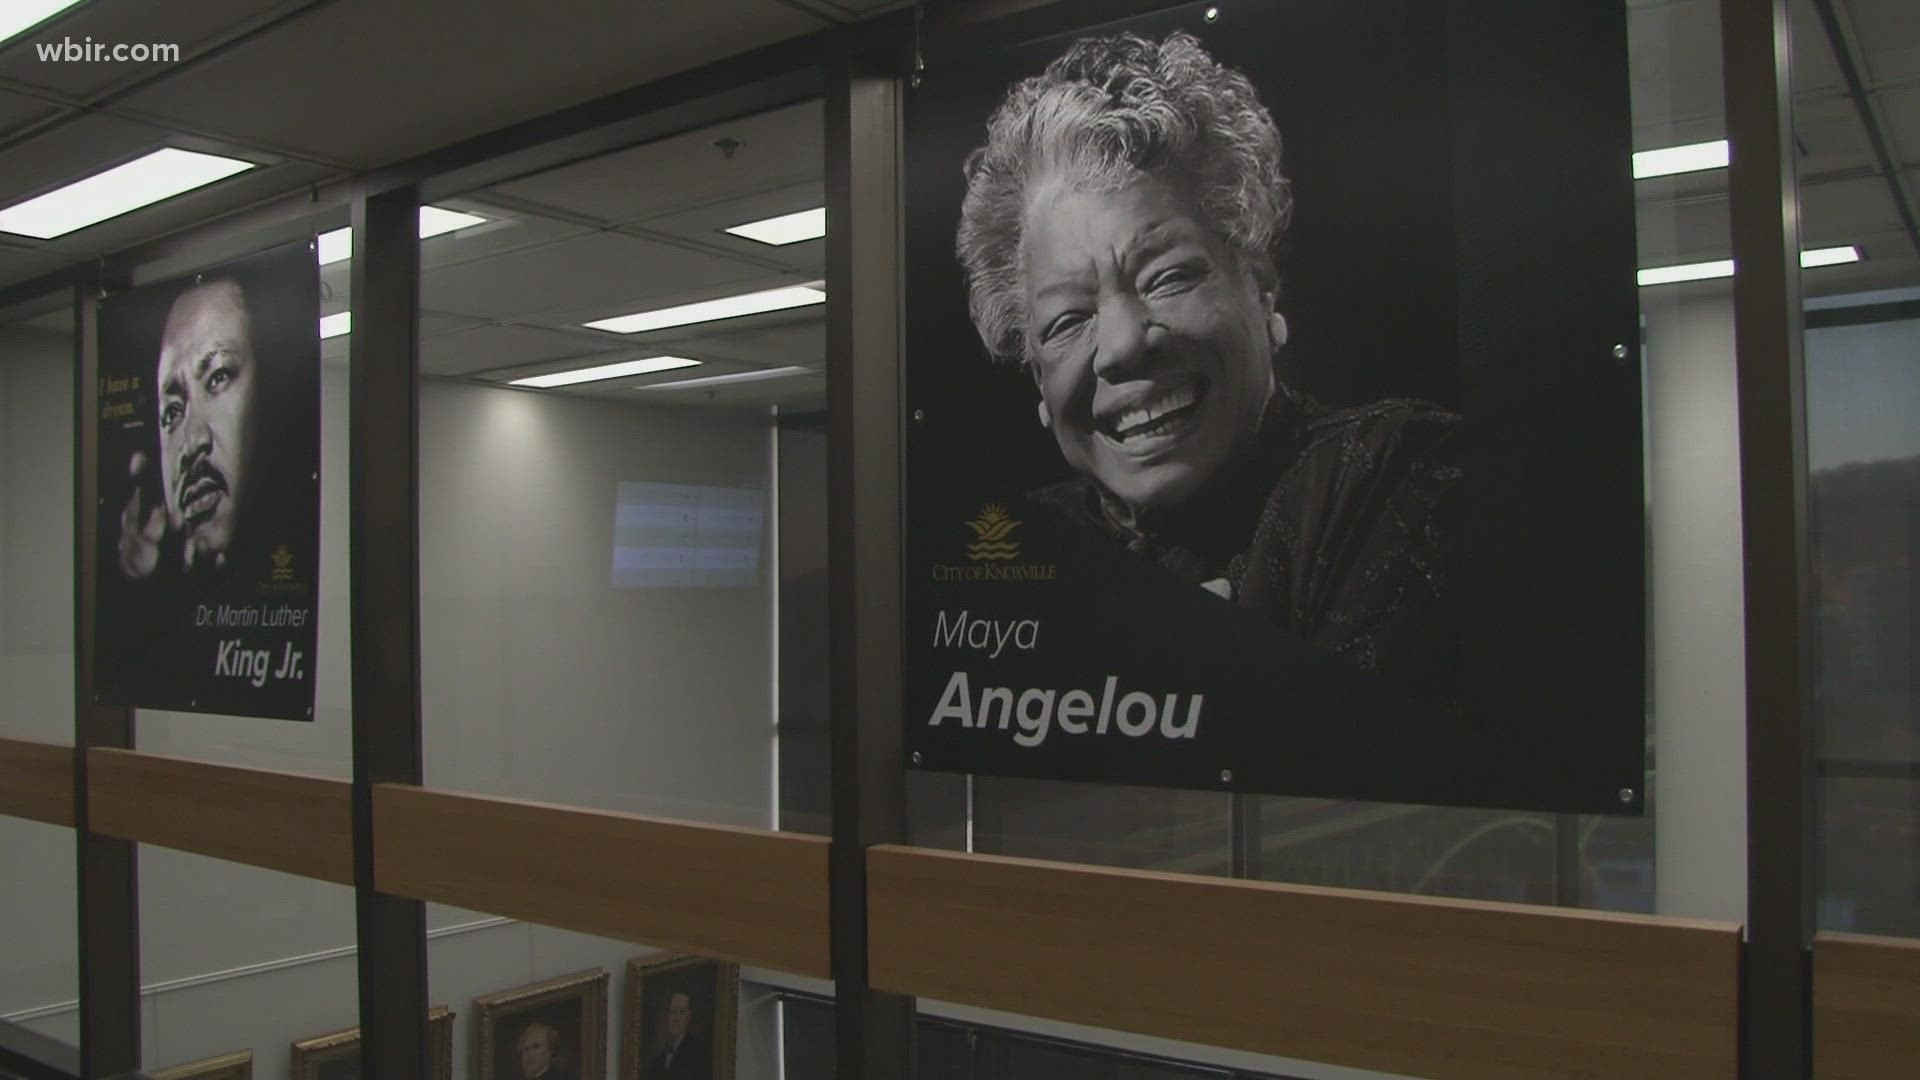 Hallways in the City County Building have been decorated with photos of Black leaders who inspired millions of people and helped shape history.